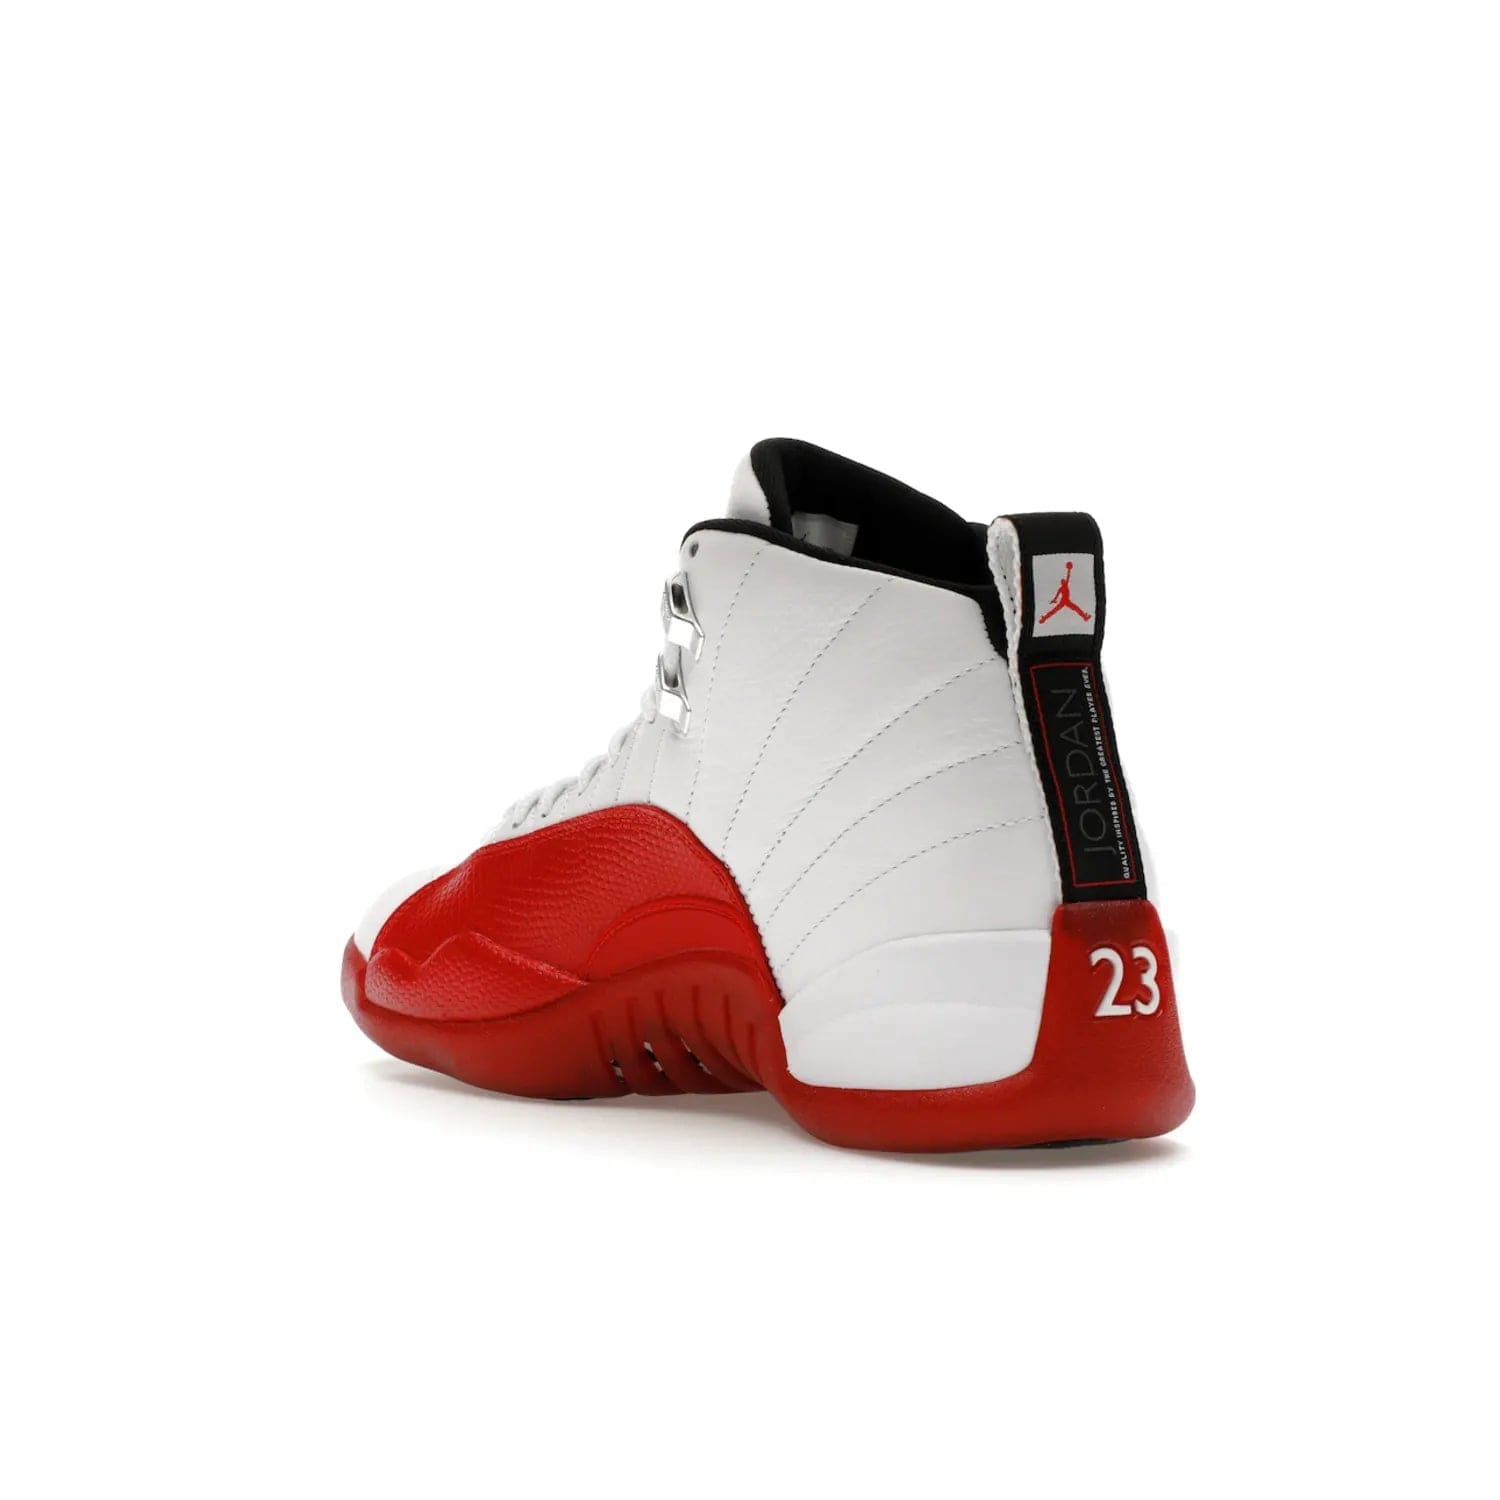 Jordan 12 Retro Cherry (2023) - Image 24 - Only at www.BallersClubKickz.com - Live your sneaker legend with the Jordan 12 Retro Cherry. Iconic pebbled leather mudguards, quilted uppers, and varsity red accents make this 1997 classic a must-have for 2023. Shine on with silver hardware and matching midsoles, and bring it all together for limited-edition style on October 28th. Step into Jordan legacy with the Retro Cherry.